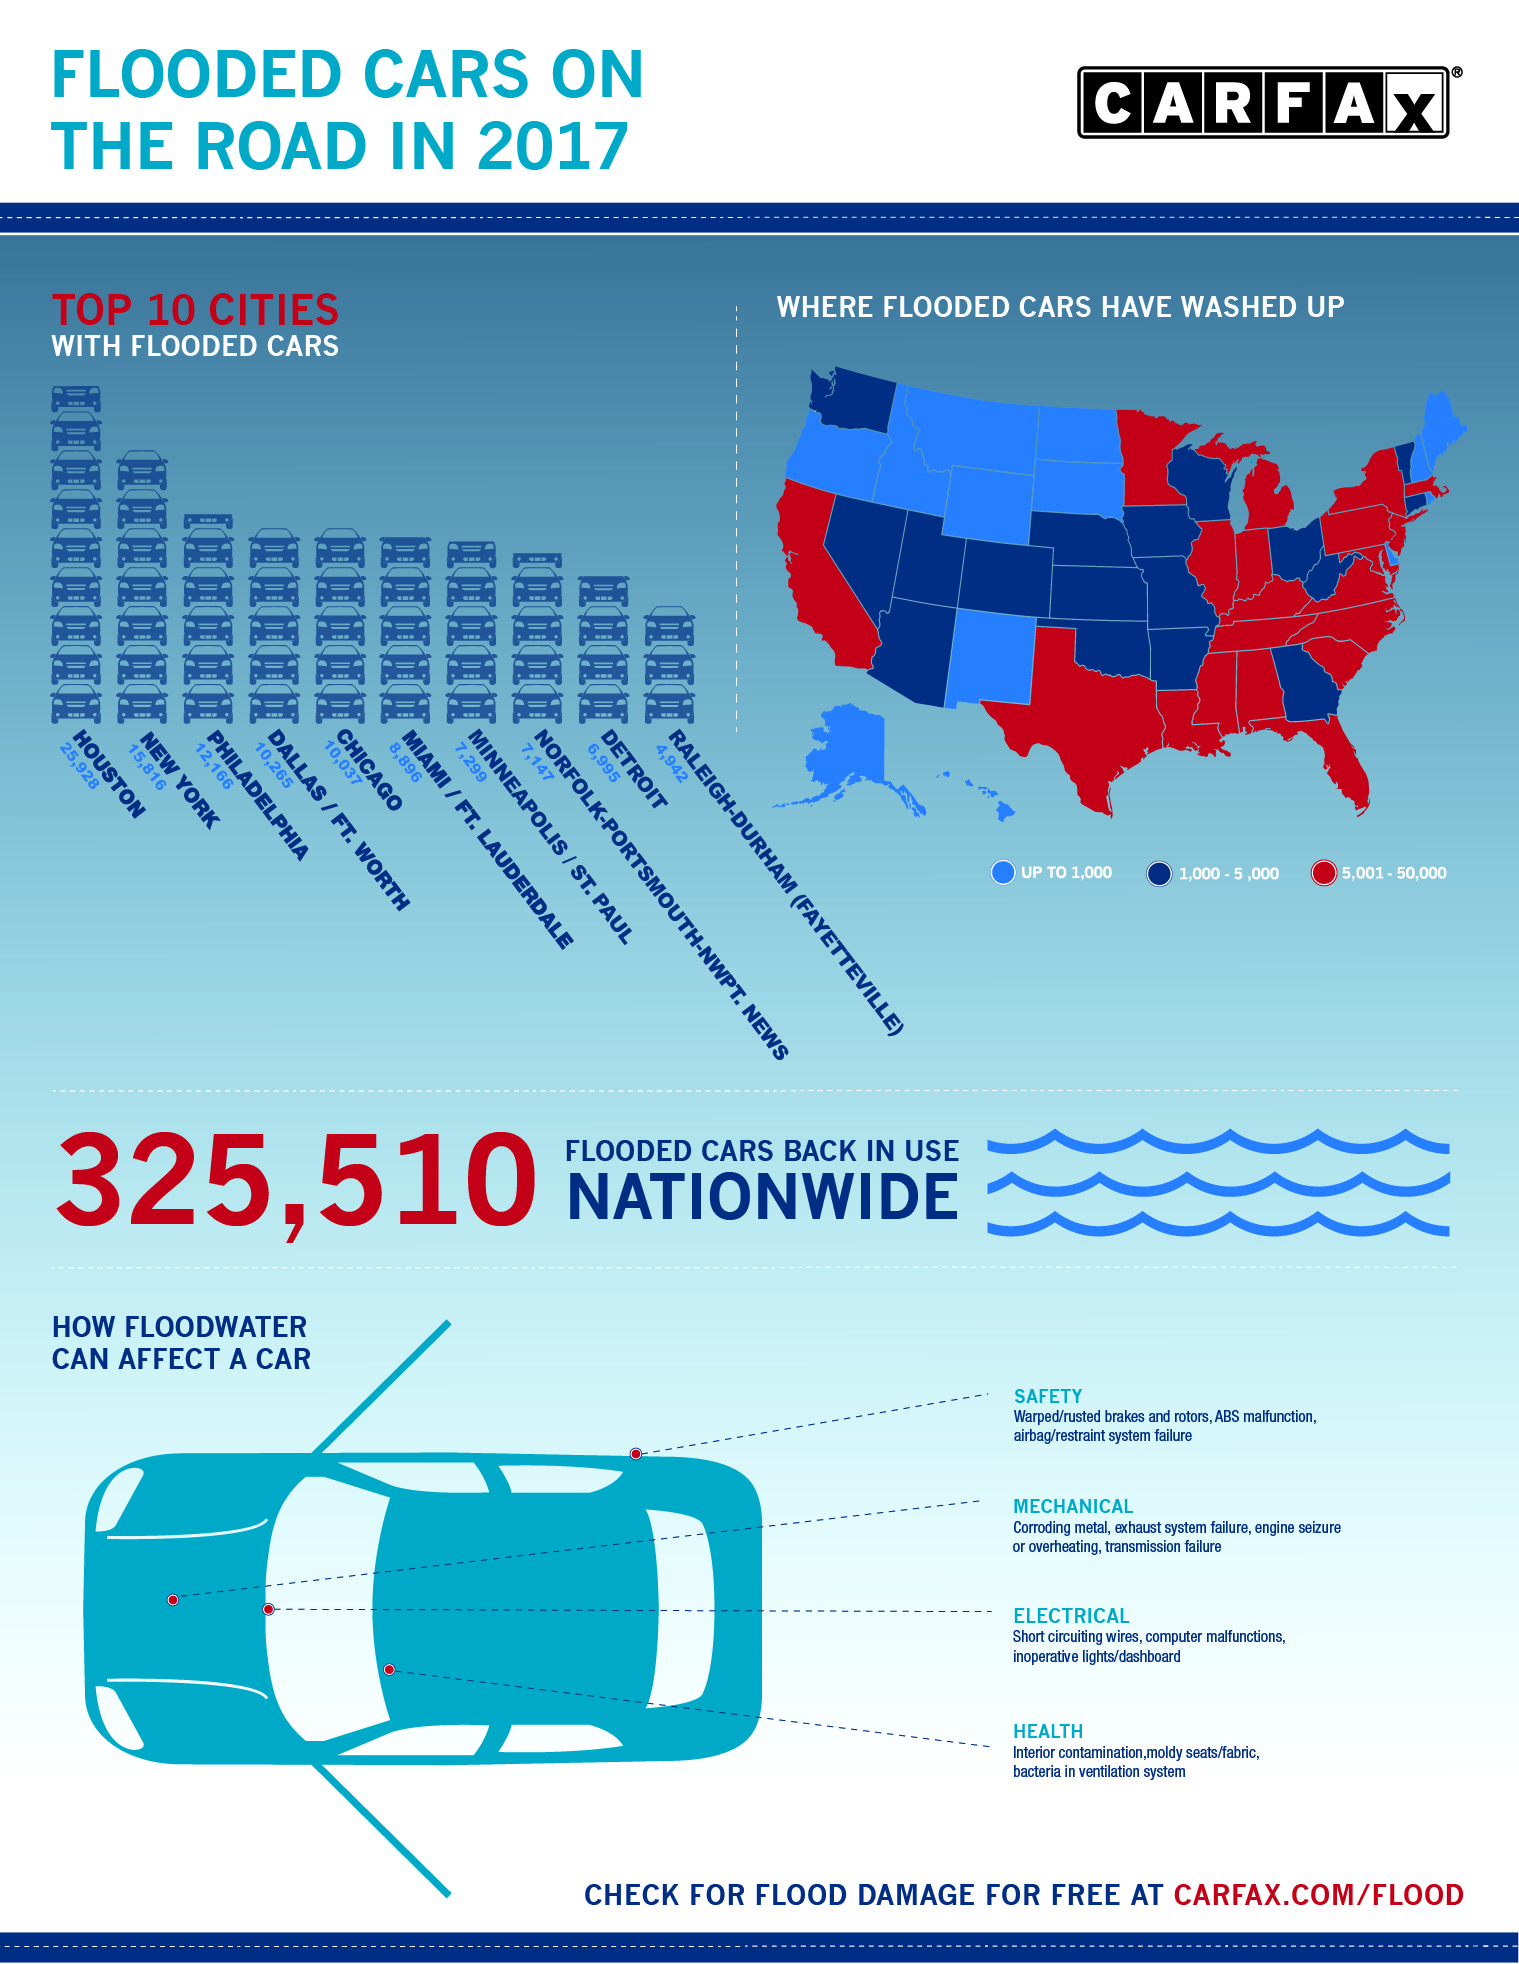 America Is Seeing A Flood Of ‘Flood Cars’ - Flooded Cars on the Road in 2017 by CarFax